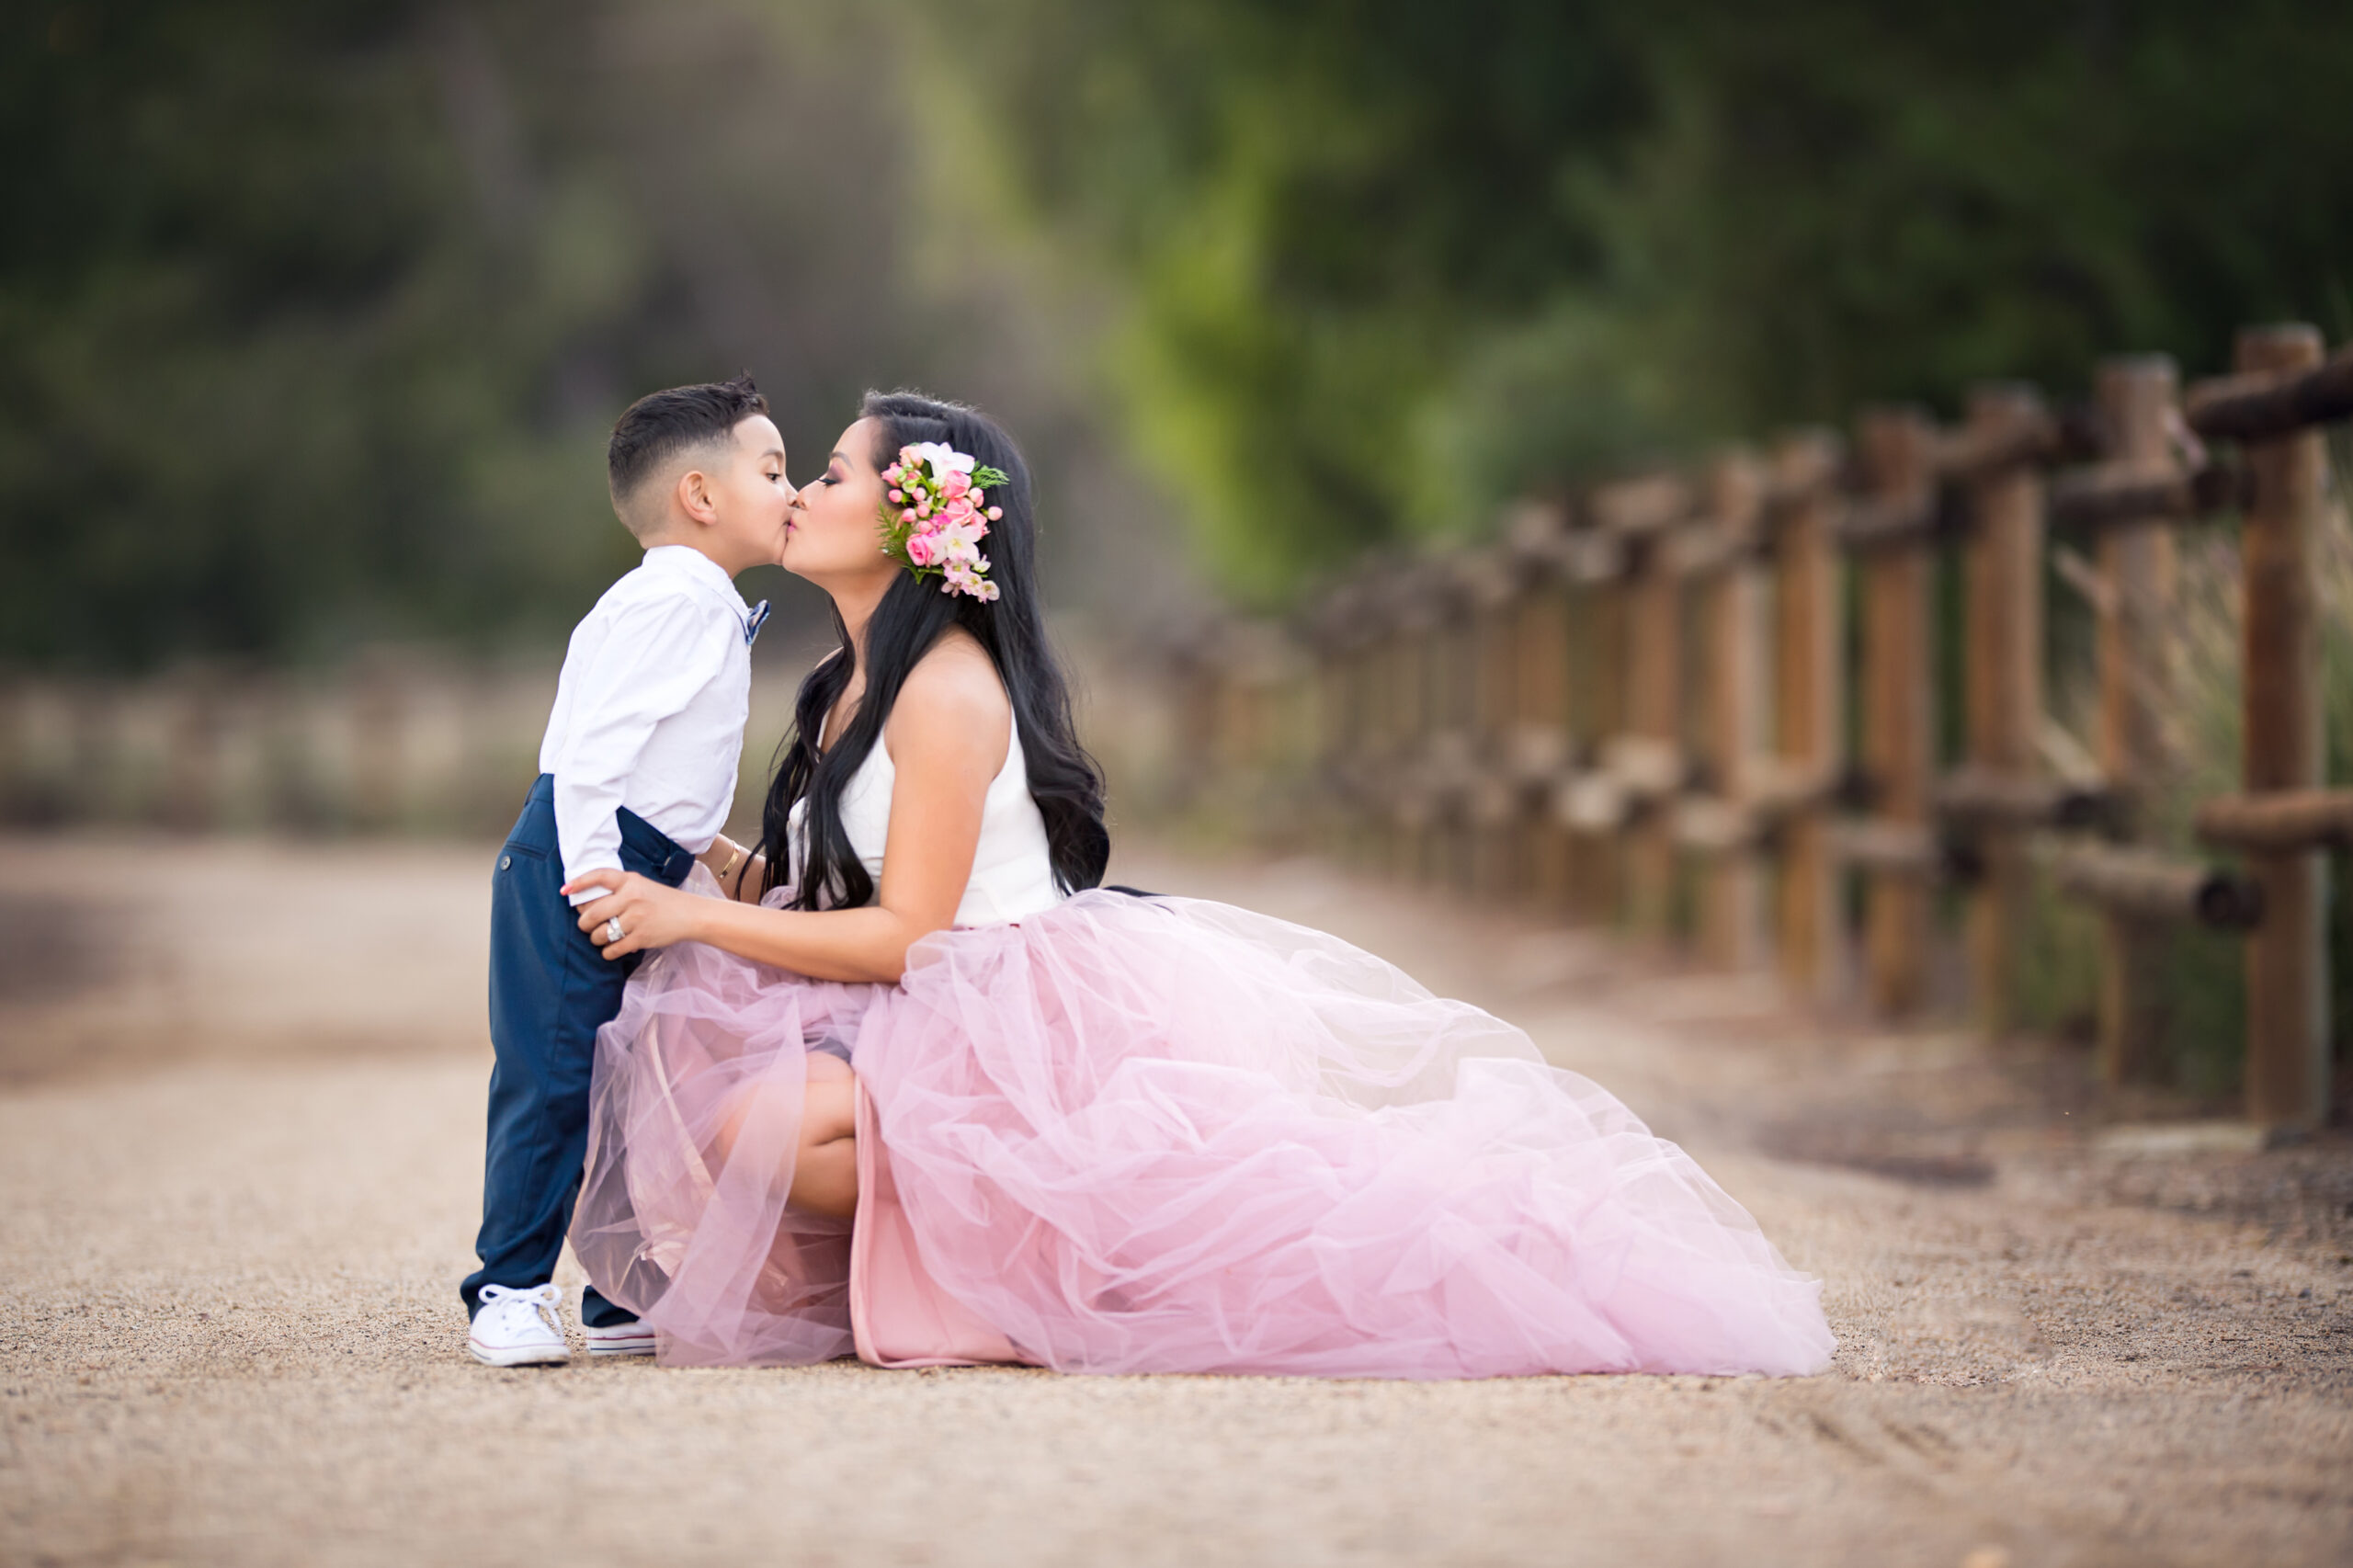 Woman with long black hair with a floral accessory on the side in pink tutu and white tank top kneeling on a dirt path and kissing a young boy in a white button up shirt and navy blue pants.